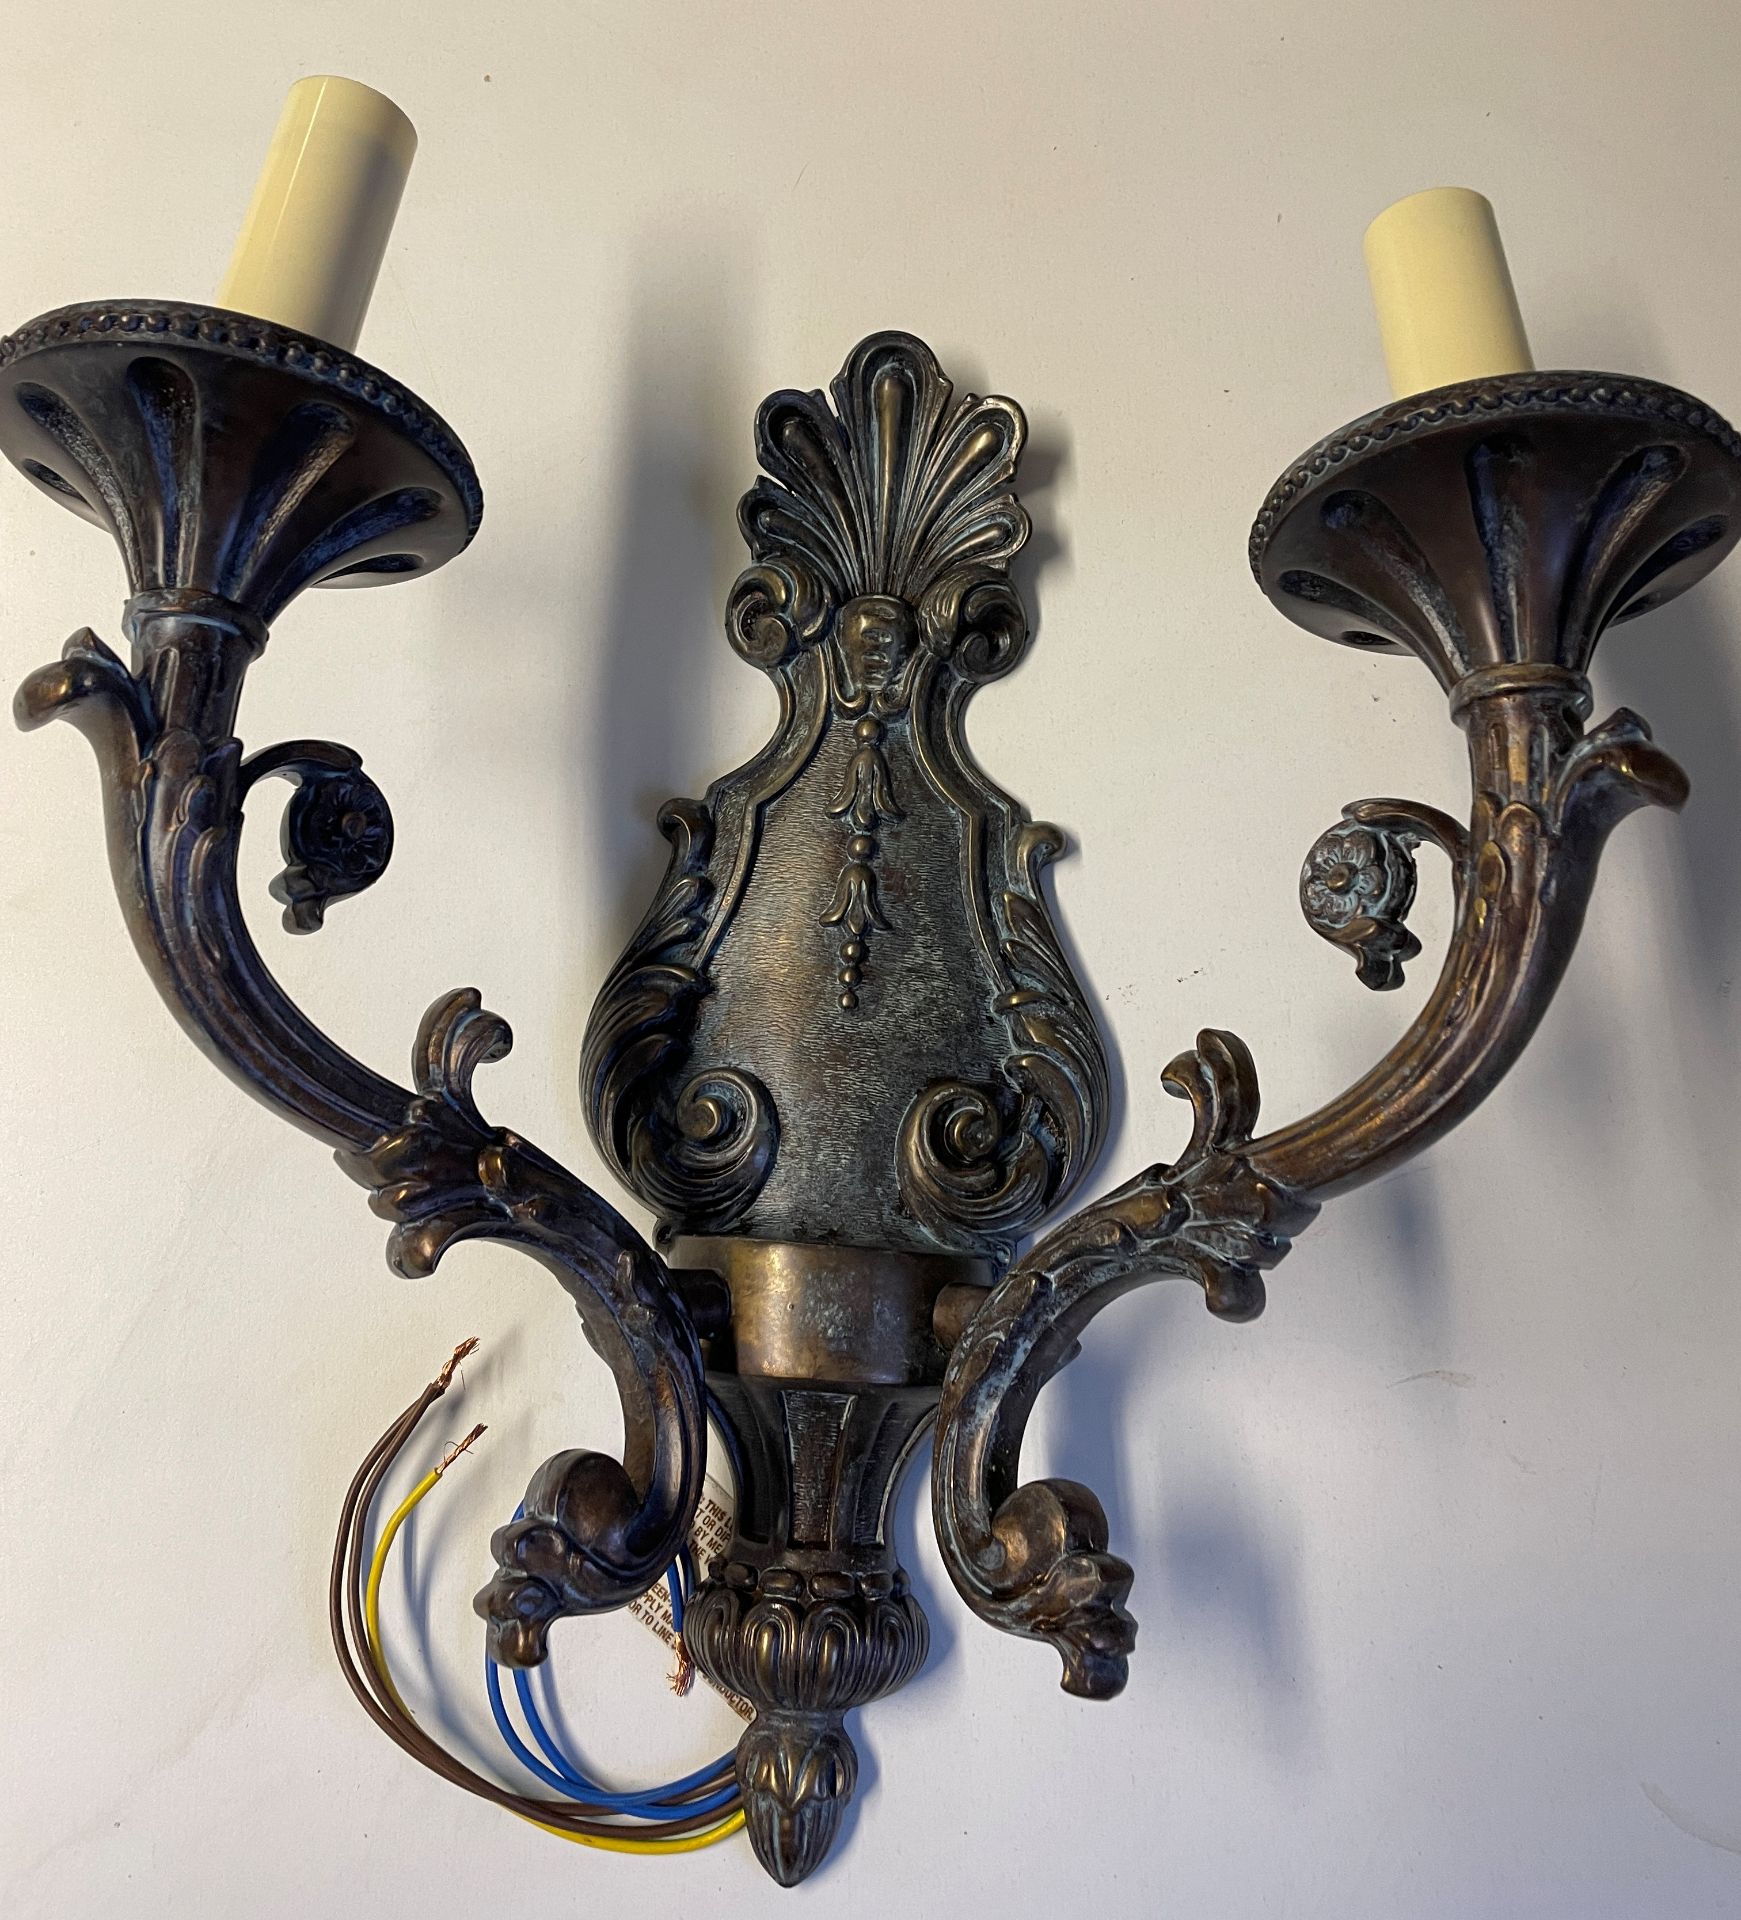 1 x Chelsom Wall Sconce with 2 Arms Arm to arm 34cm x Height 34cm - designed exclusively for one of - Image 5 of 8